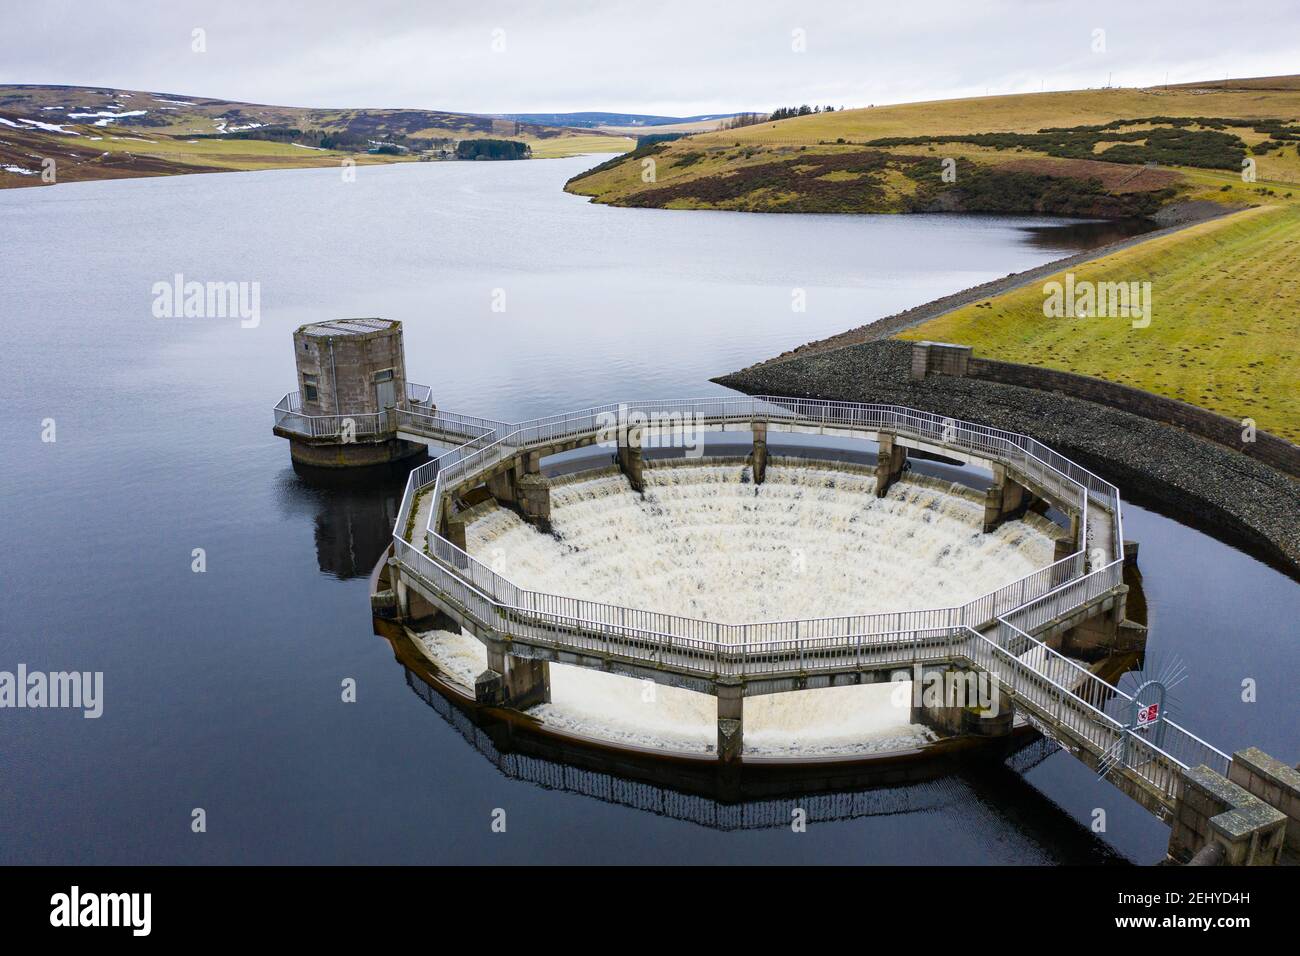 East Lothian, Scotland, UK. 20 Feb 2021. Meltwater from recent snow and heavy rain has filled Scottish reservoirs to capacity. Dam spillways are now full whilst discharging water downstream. Pic; Drone image of circular siphon spillway at Whiteadder Dam running at full capacity to discharge water from the reservoir. Iain Masterton/Alamy Live News Stock Photo